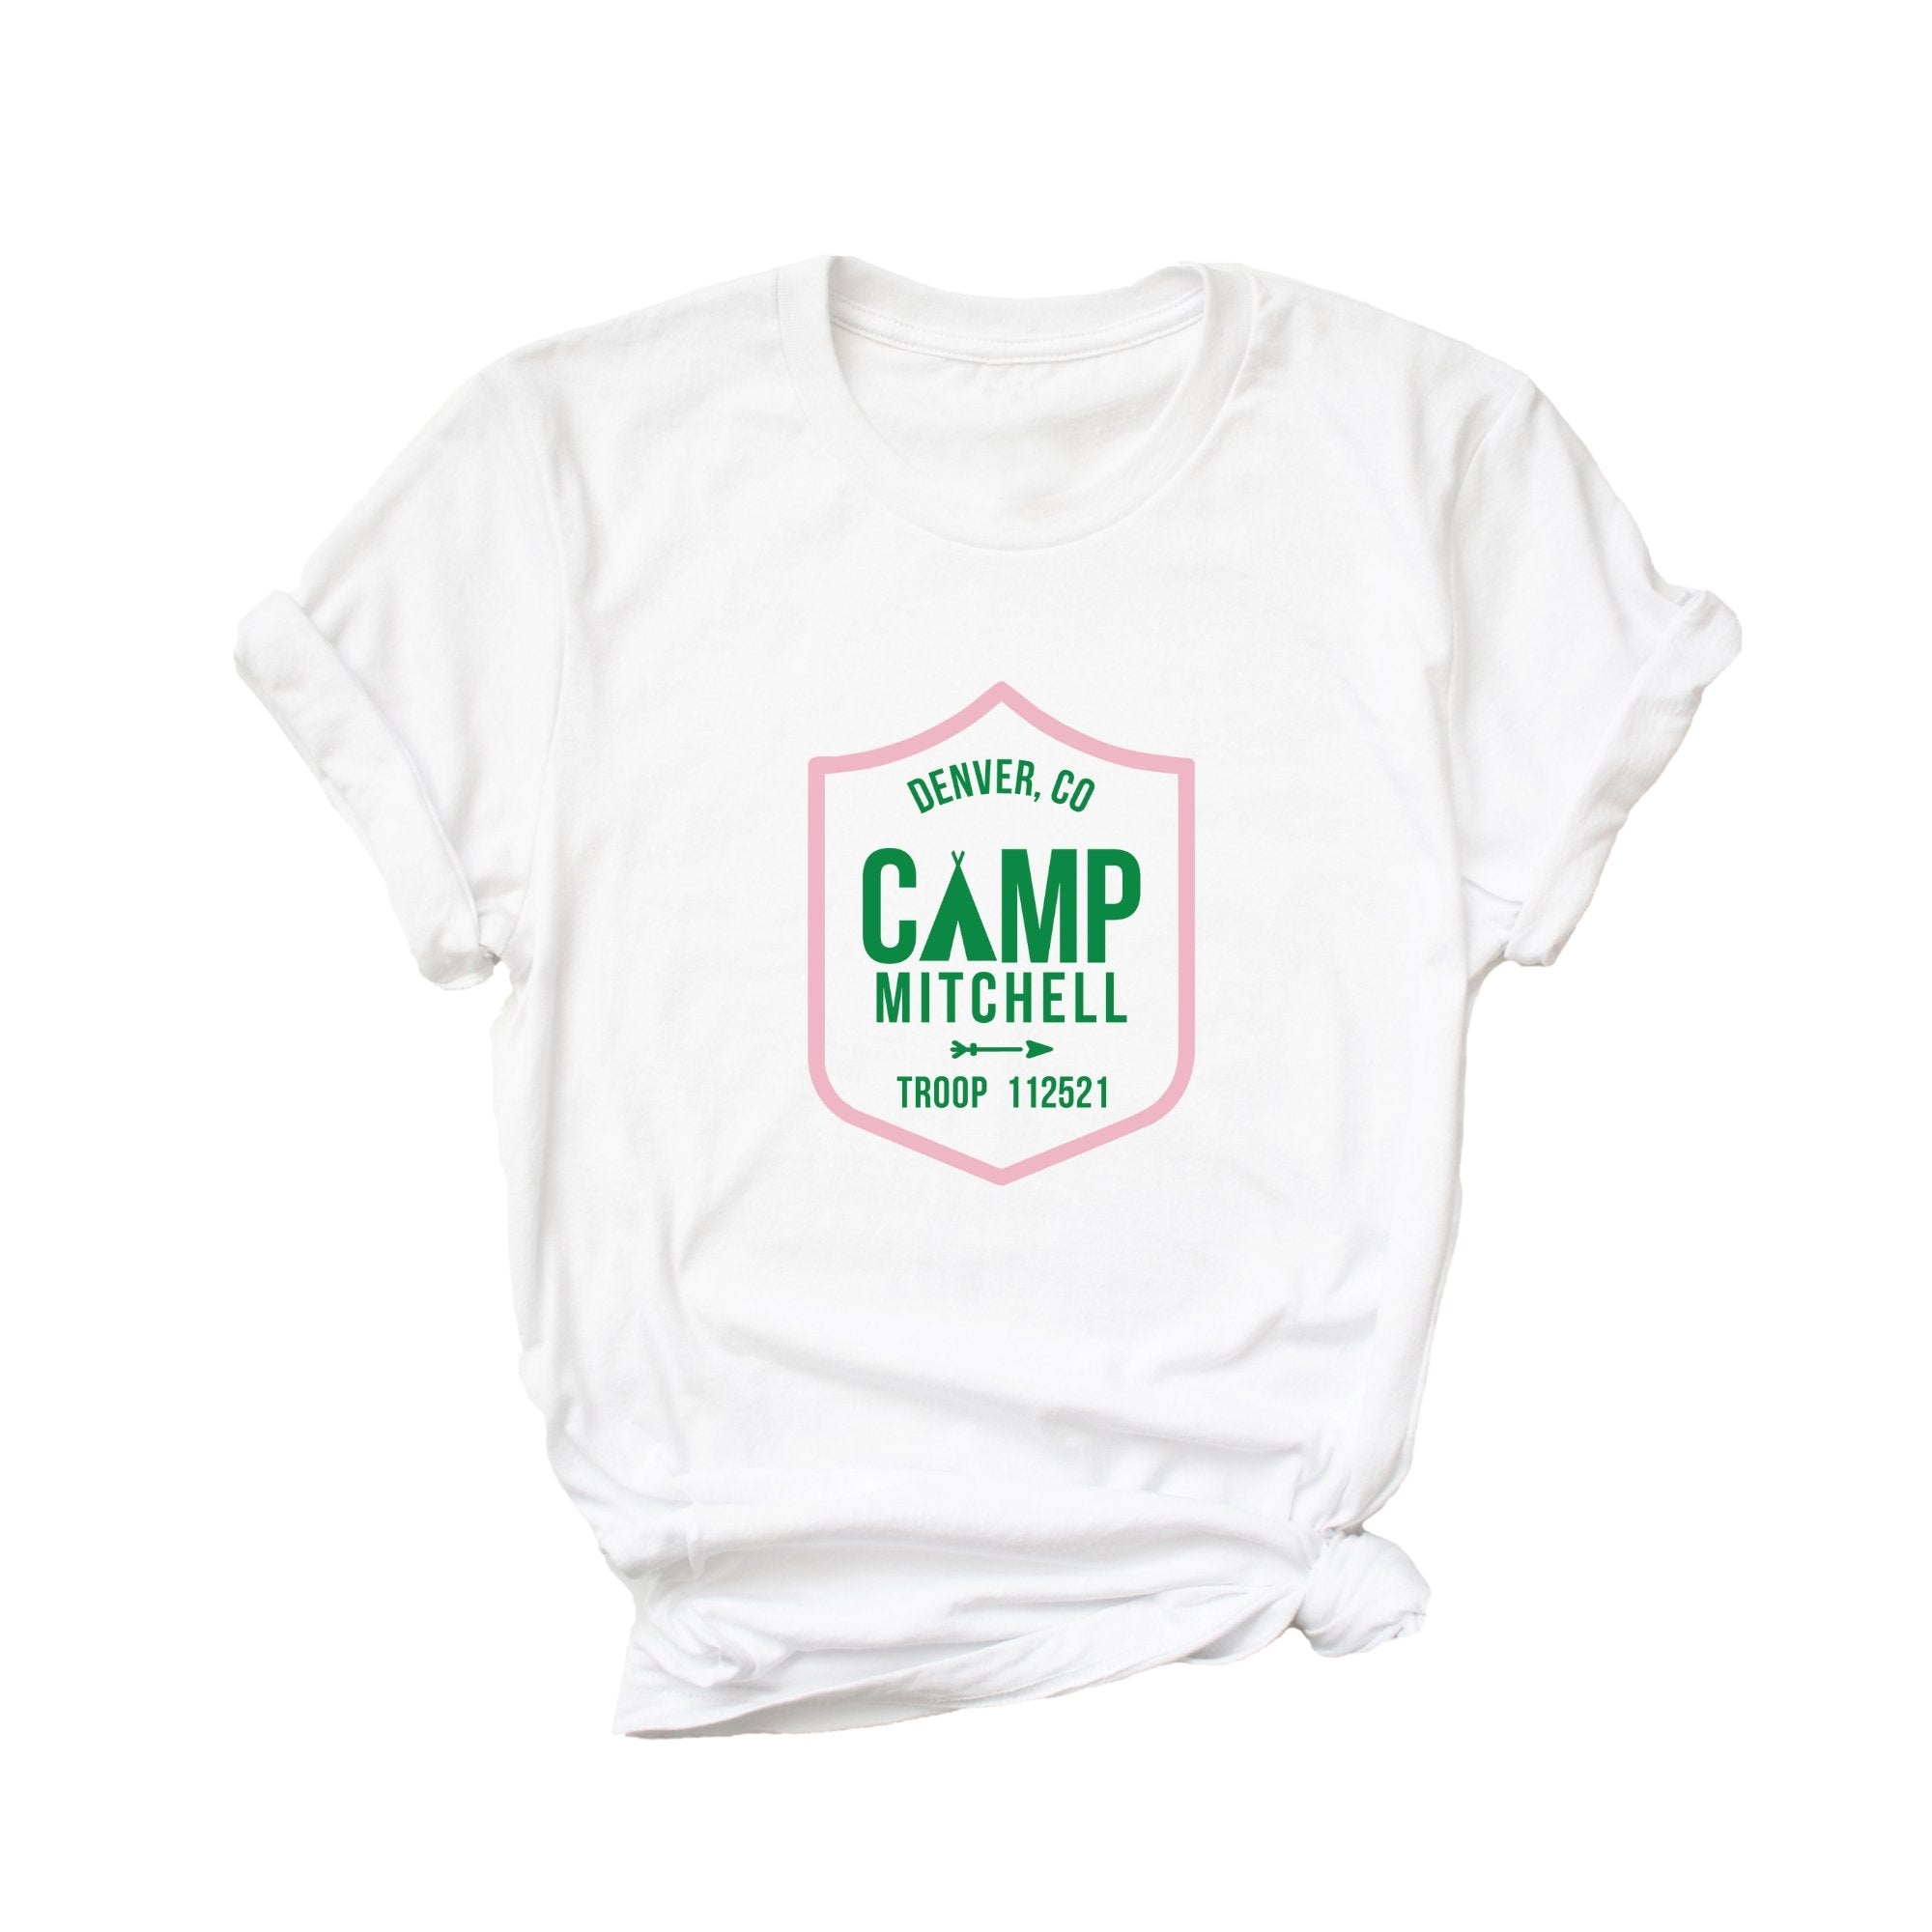 A white t shirt is customized with a green and pink camp logo